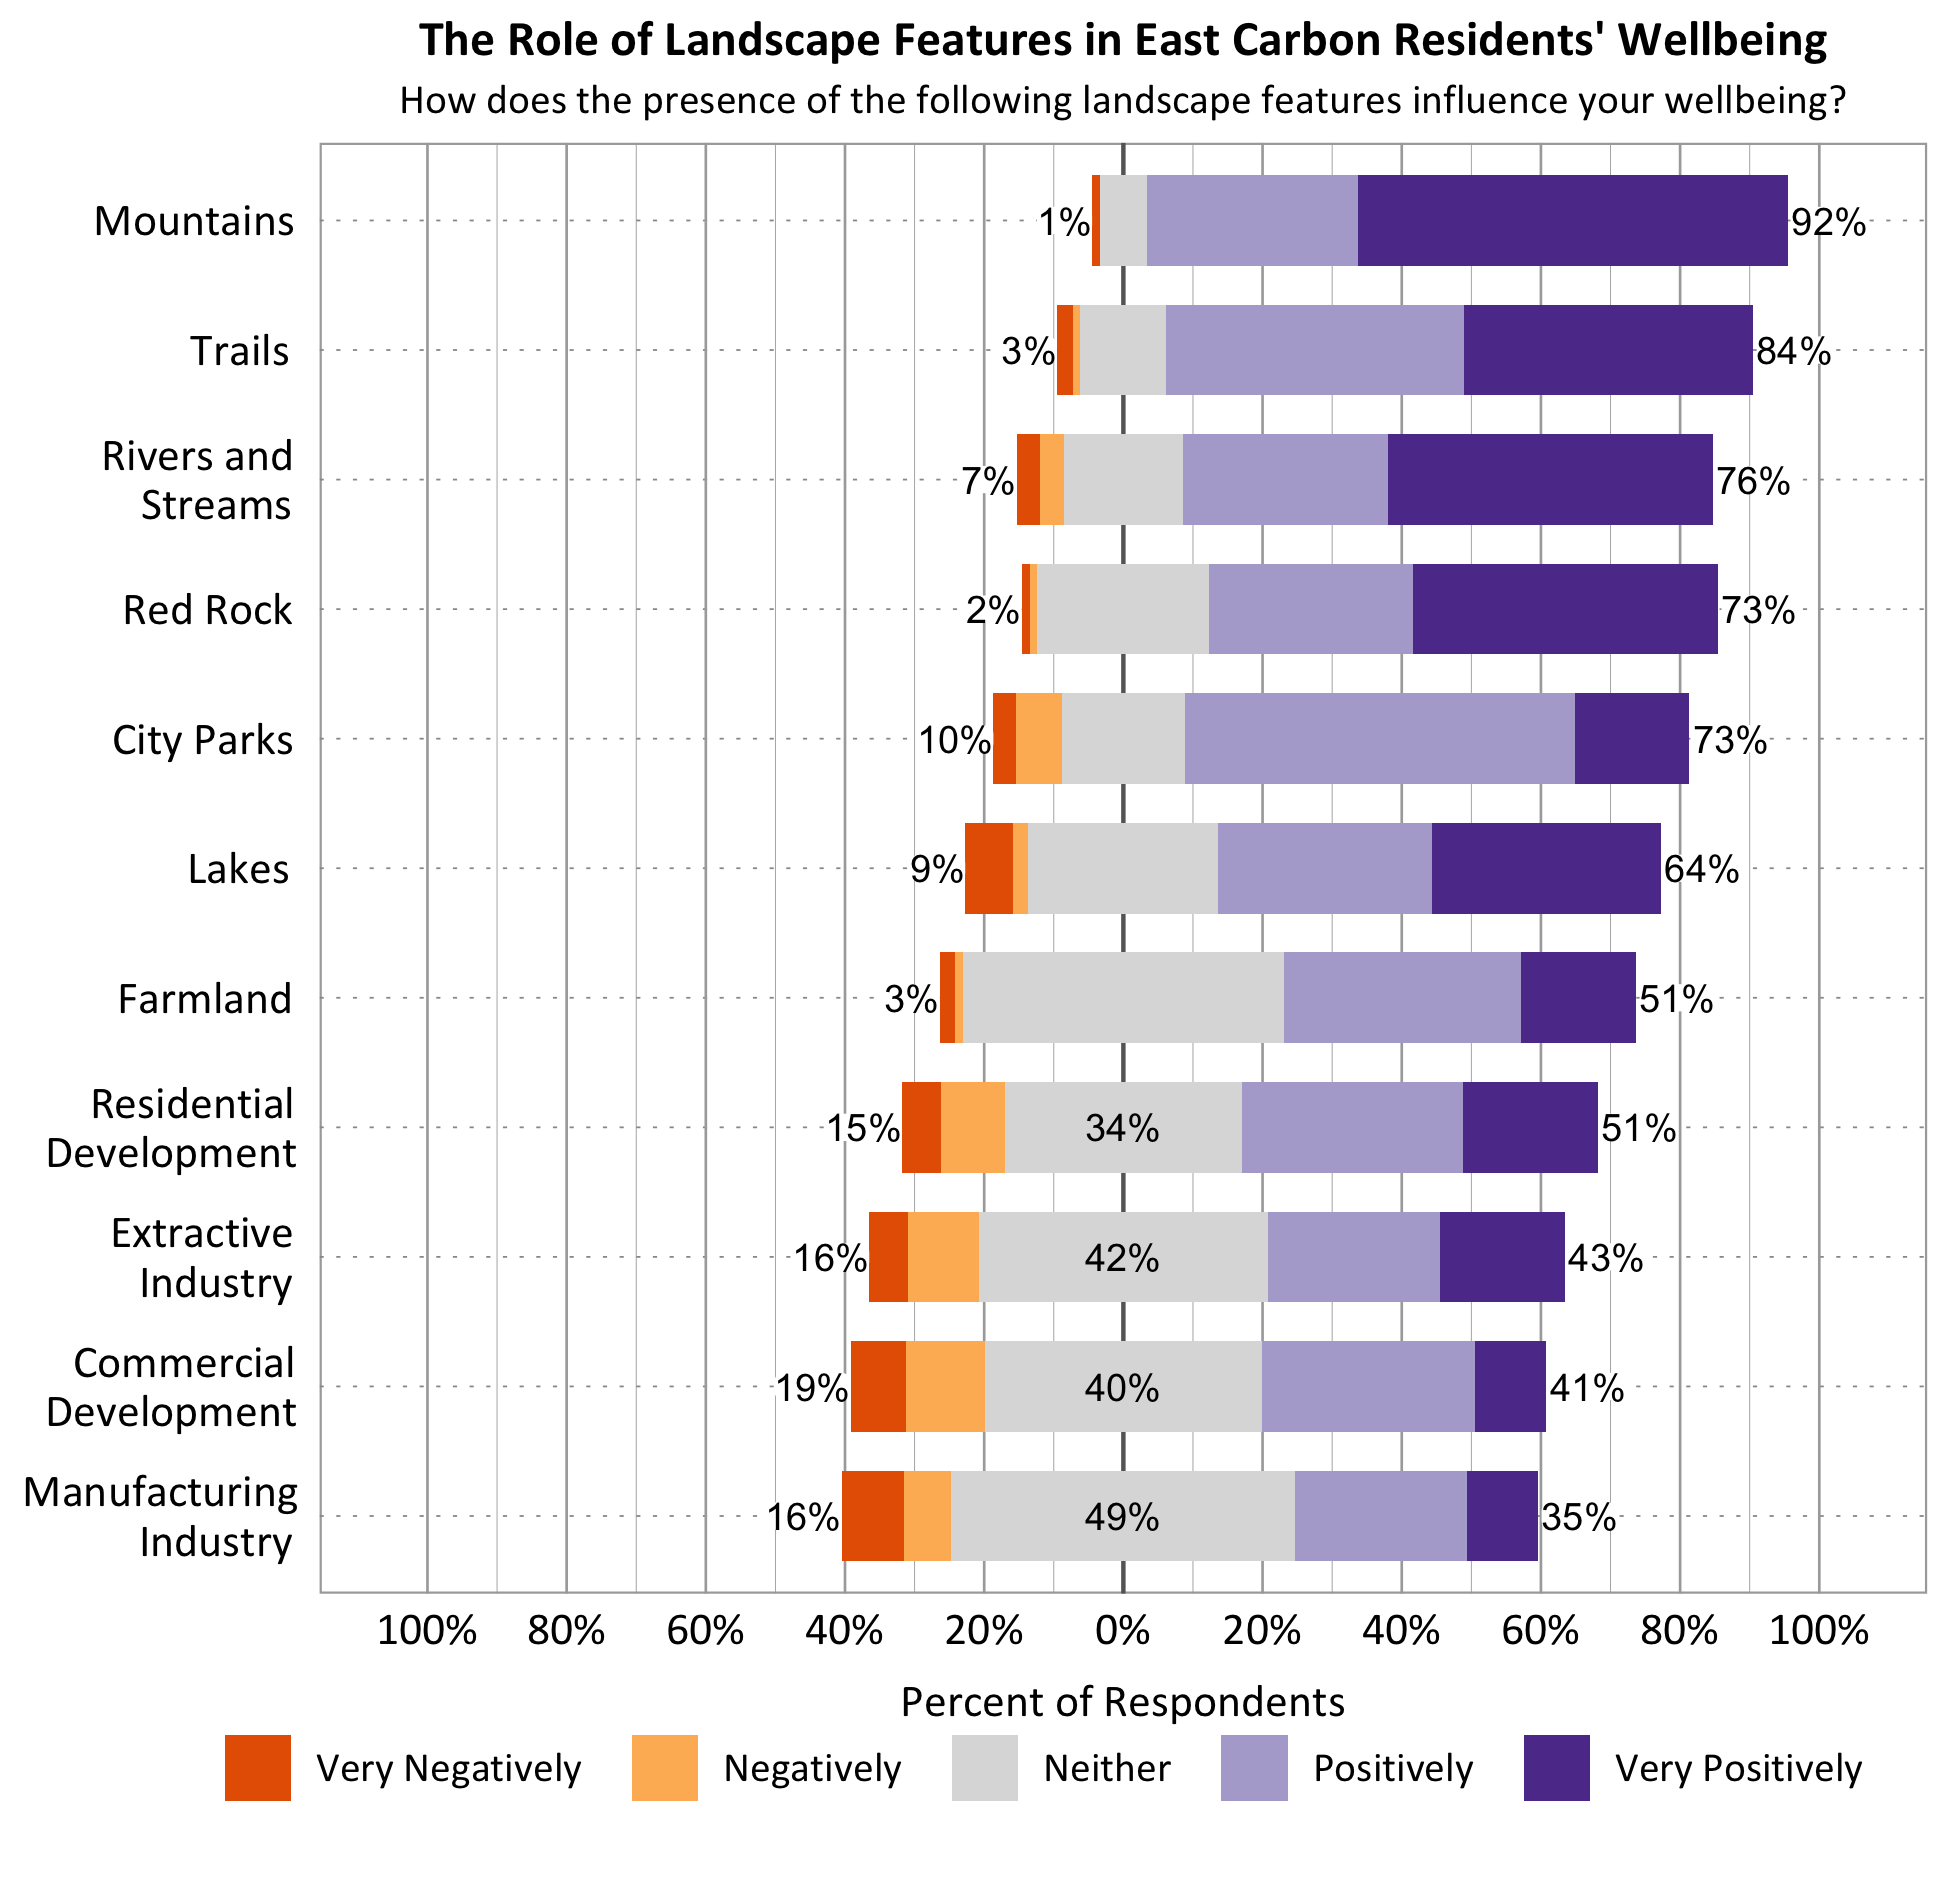 Likert Graph. Title: The Role of Landscape Features in East Carbons Residents' Wellbeing. Subtitle: How does the presence of the following landscape features influence your wellbeing? Feature: Mountains - 1% of respondents indicated very negatively or negatively, 7% indicated neither, 92% indicated positively or very positively; Feature: Rivers and Streams - 7% of respondents indicated very negatively or negatively, 17% indicated neither, 76% indicated positively or very positively; Feature: Lakes - 9% of respondents indicated very negatively or negatively, 27% indicated neither, 64% indicated positively or very positively; Feature: Trails - 3% of respondents indicated very negatively or negatively, 13% indicated neither, 84% indicated positively or very positively; Feature: City Parks - 10% of respondents indicated very negatively or negatively, 17% indicated neither, 73% indicated positively or very positively; Feature: Red Rock - 2% of respondents indicated very negatively or negatively, 25% indicated neither, 73% indicated positively or very positively; Feature: Farmland - 3% of respondents indicated very negatively or negatively, 46% indicated neither, 51% indicated positively or very positively; Commercial Development - 19% of respondents indicated very negatively or negatively, 40% indicated neither, 41% indicated positively or very positively; Feature: Residential Development - 15% of respondents indicated very negatively or negatively, 34% indicated neither, 51% indicated positively or very positively; Feature: Feature: Manufacturing Industry - 16% of respondents indicated very negatively or negatively, 49% indicated neither, 35% indicated positively or very positively; Feature: Extractive Industry - 16% of respondents indicated very negatively or negatively, 42% indicated neither, 43% indicated positively or very positively.